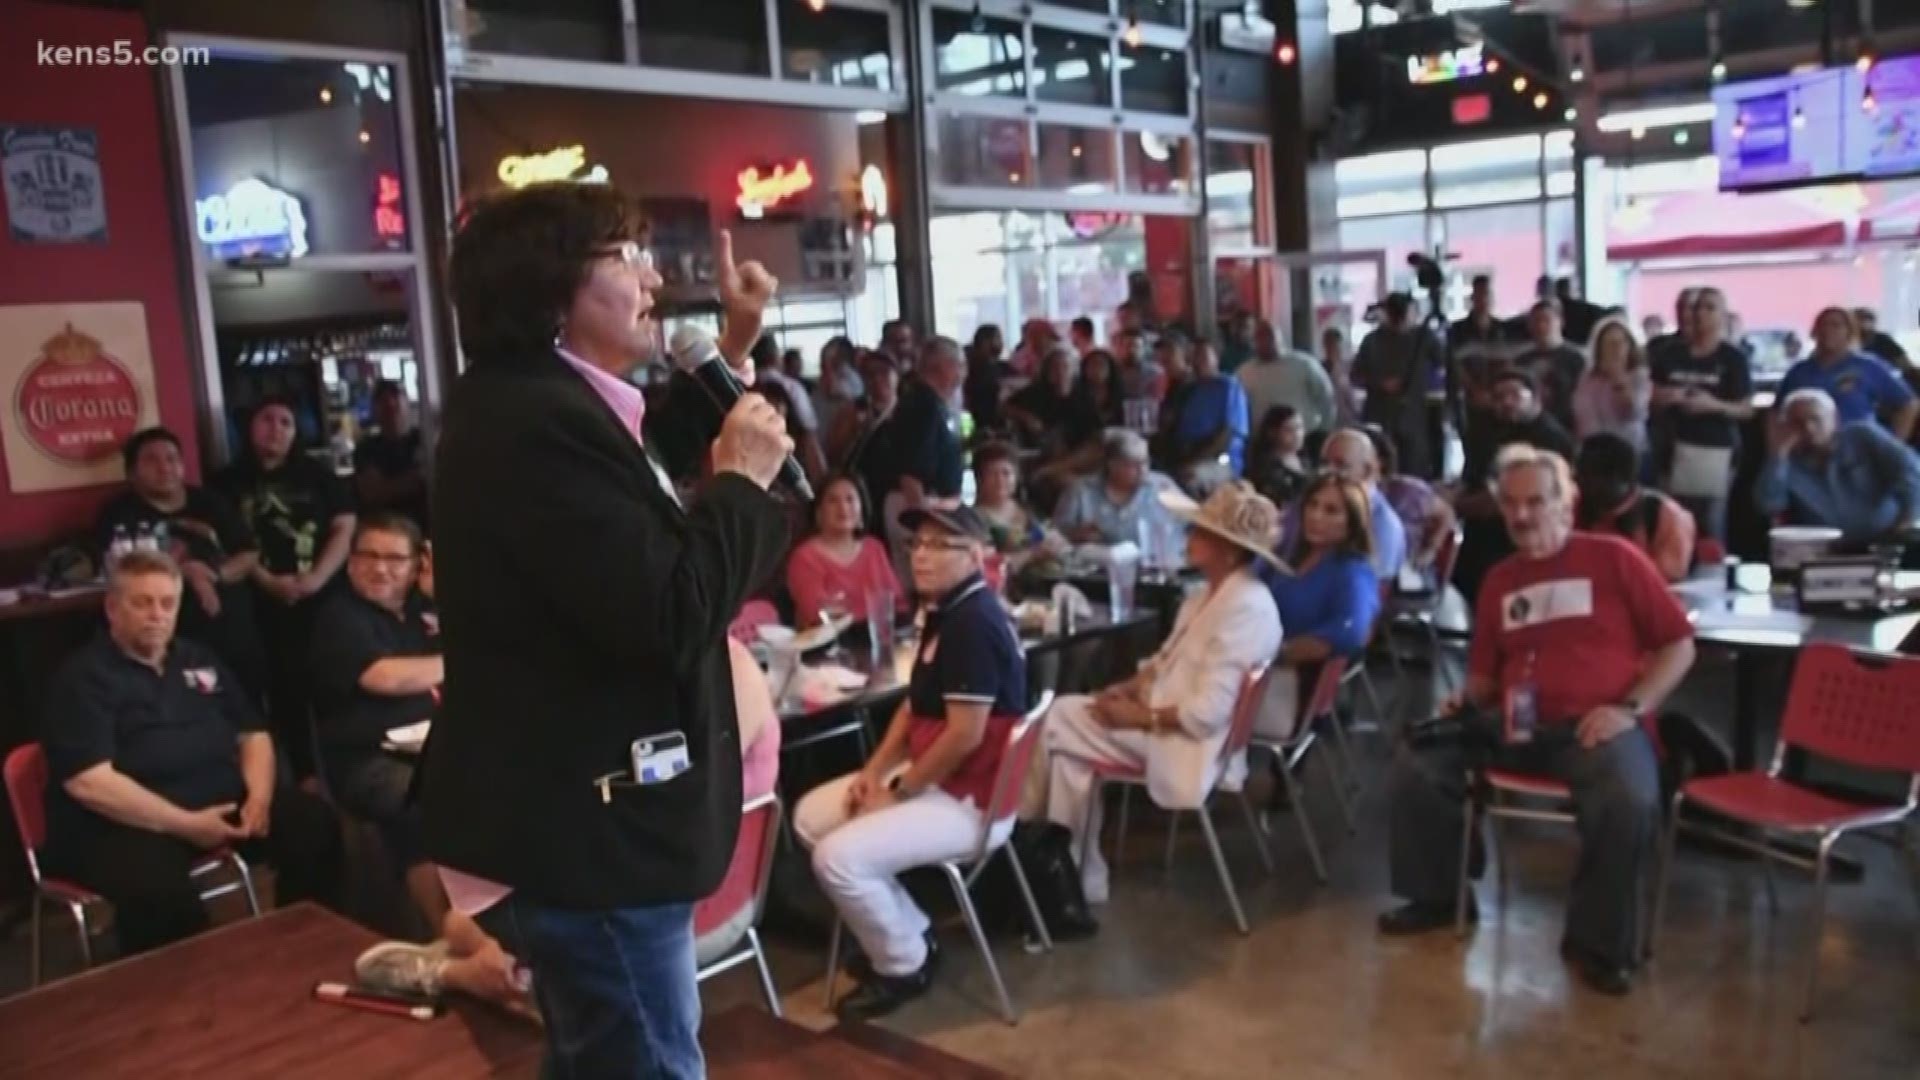 Lupe Valdez could be Texas' first openly gay, Latina governor.